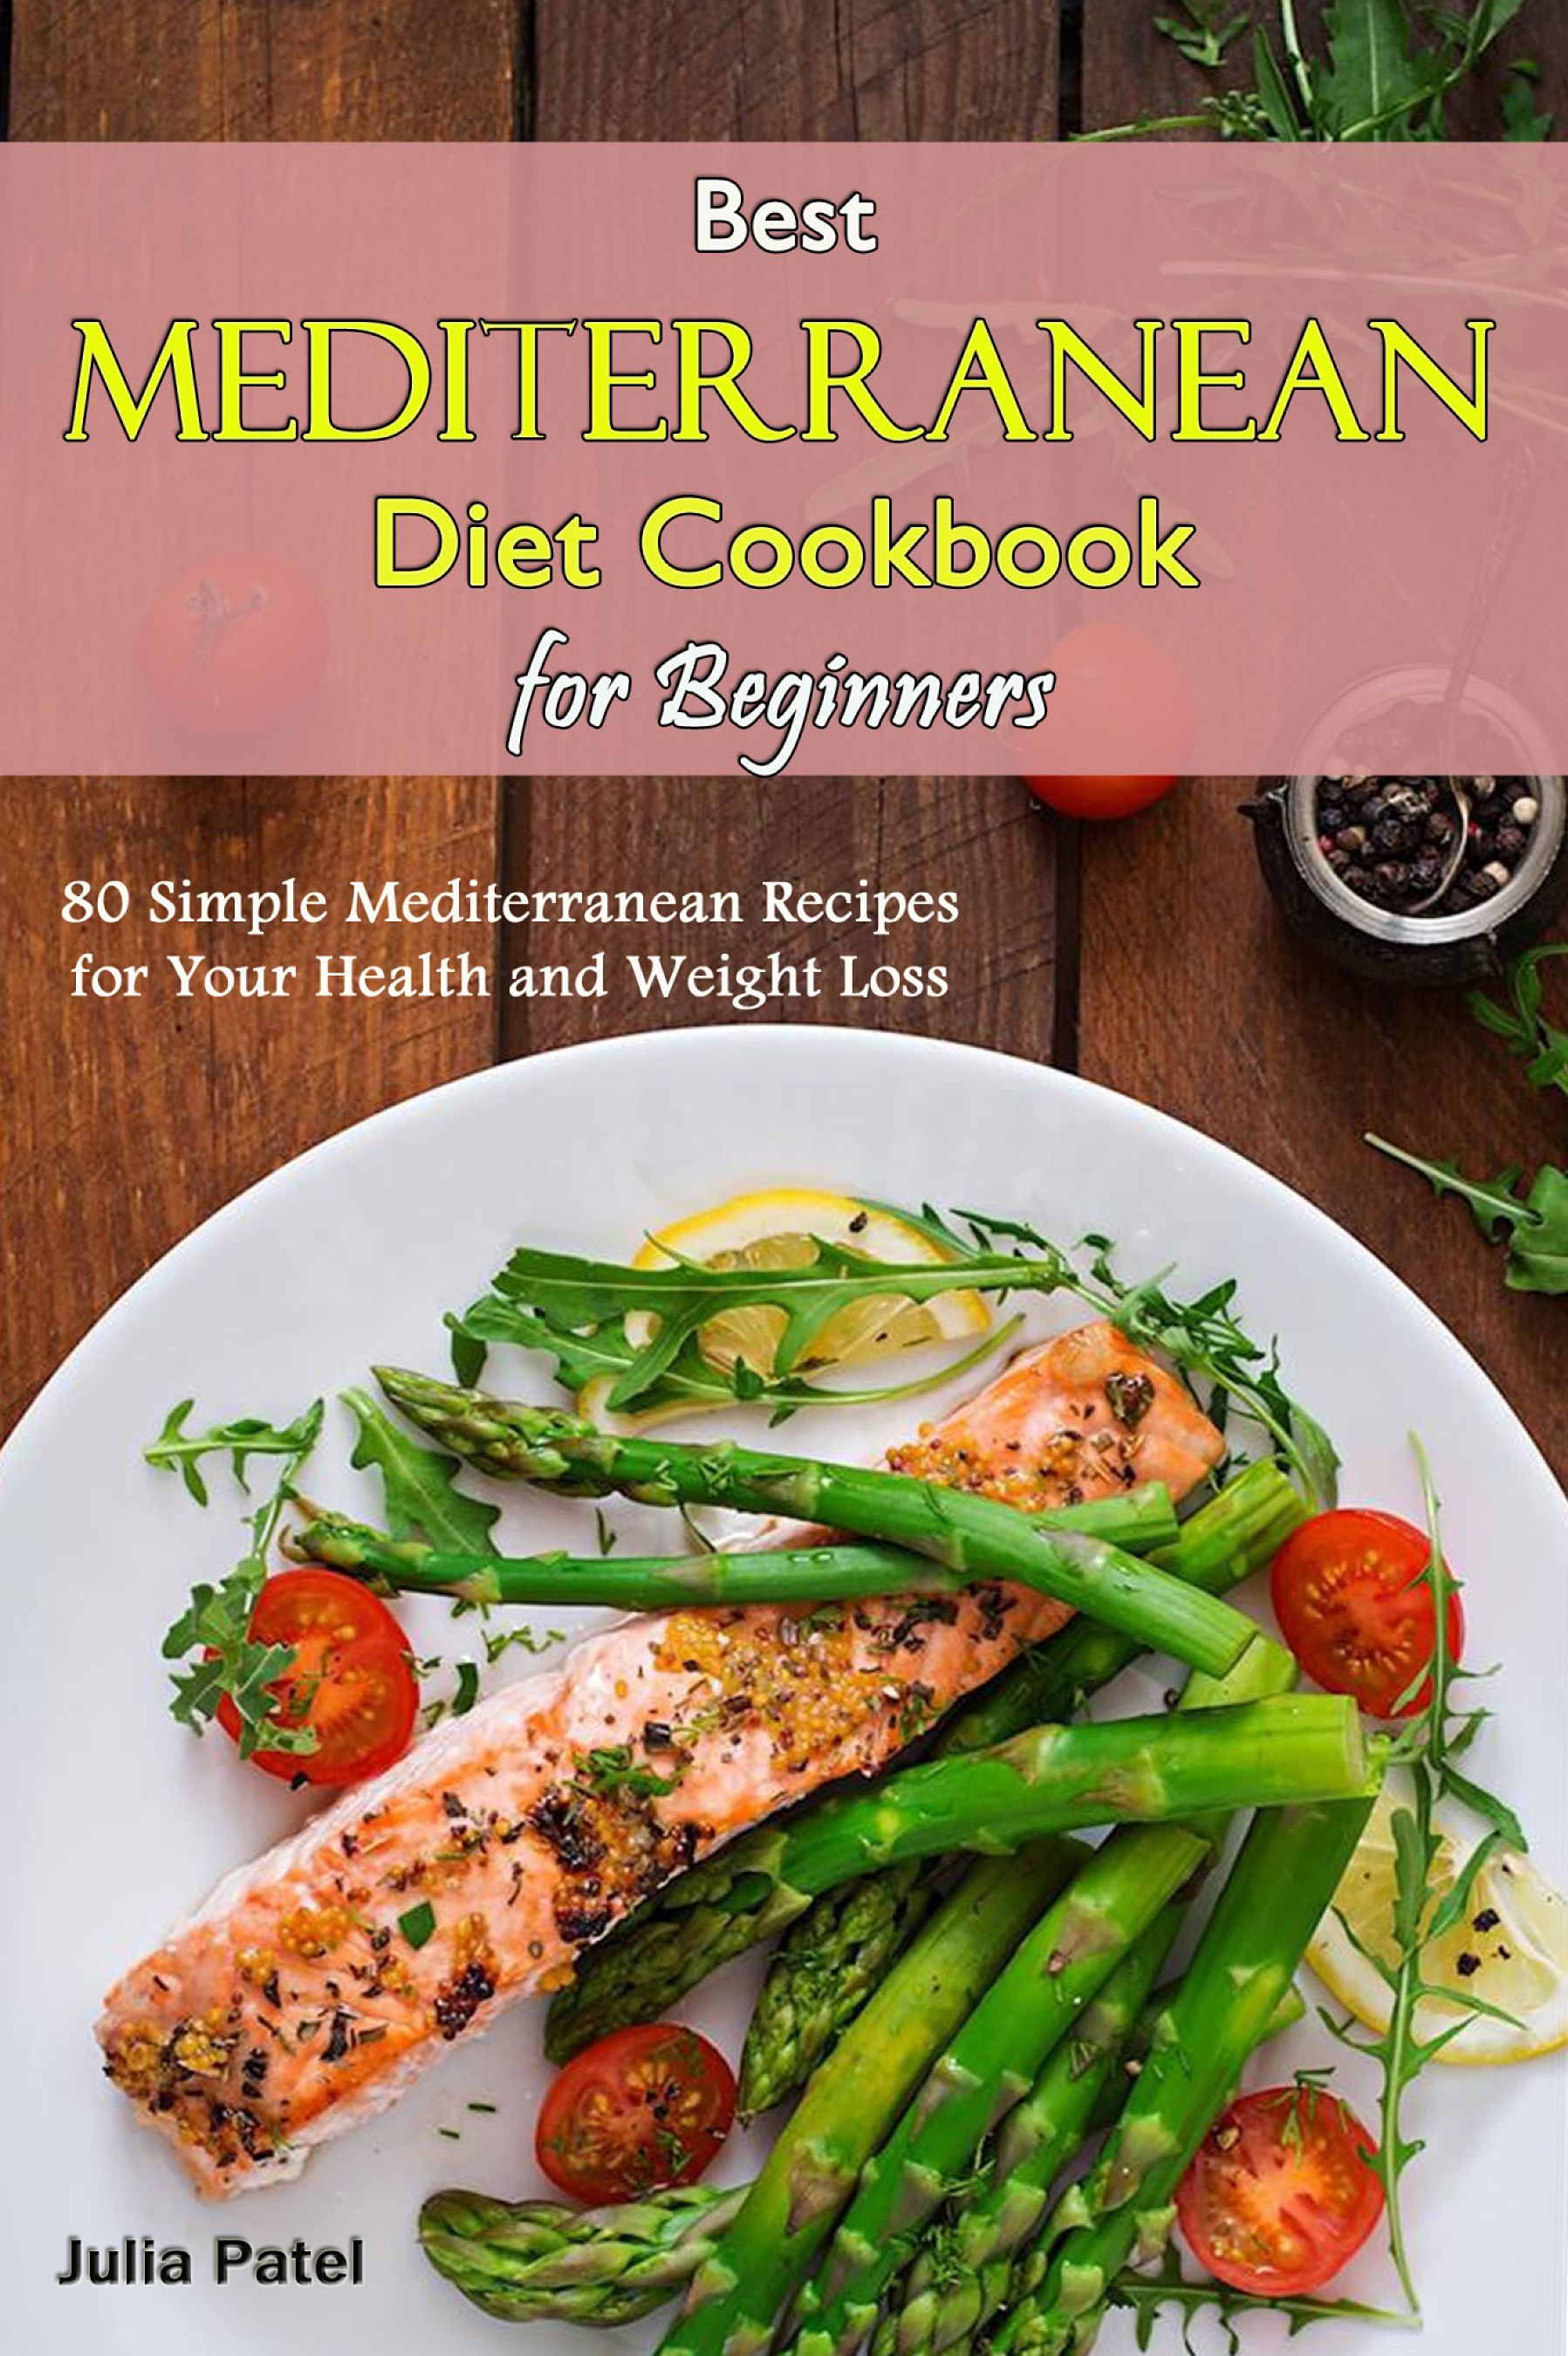 FREE: Best Mediterranean Diet Cookbook for Beginners: 80 Simple Mediterranean Recipes for Your Health and Weight Loss by Julia Patel